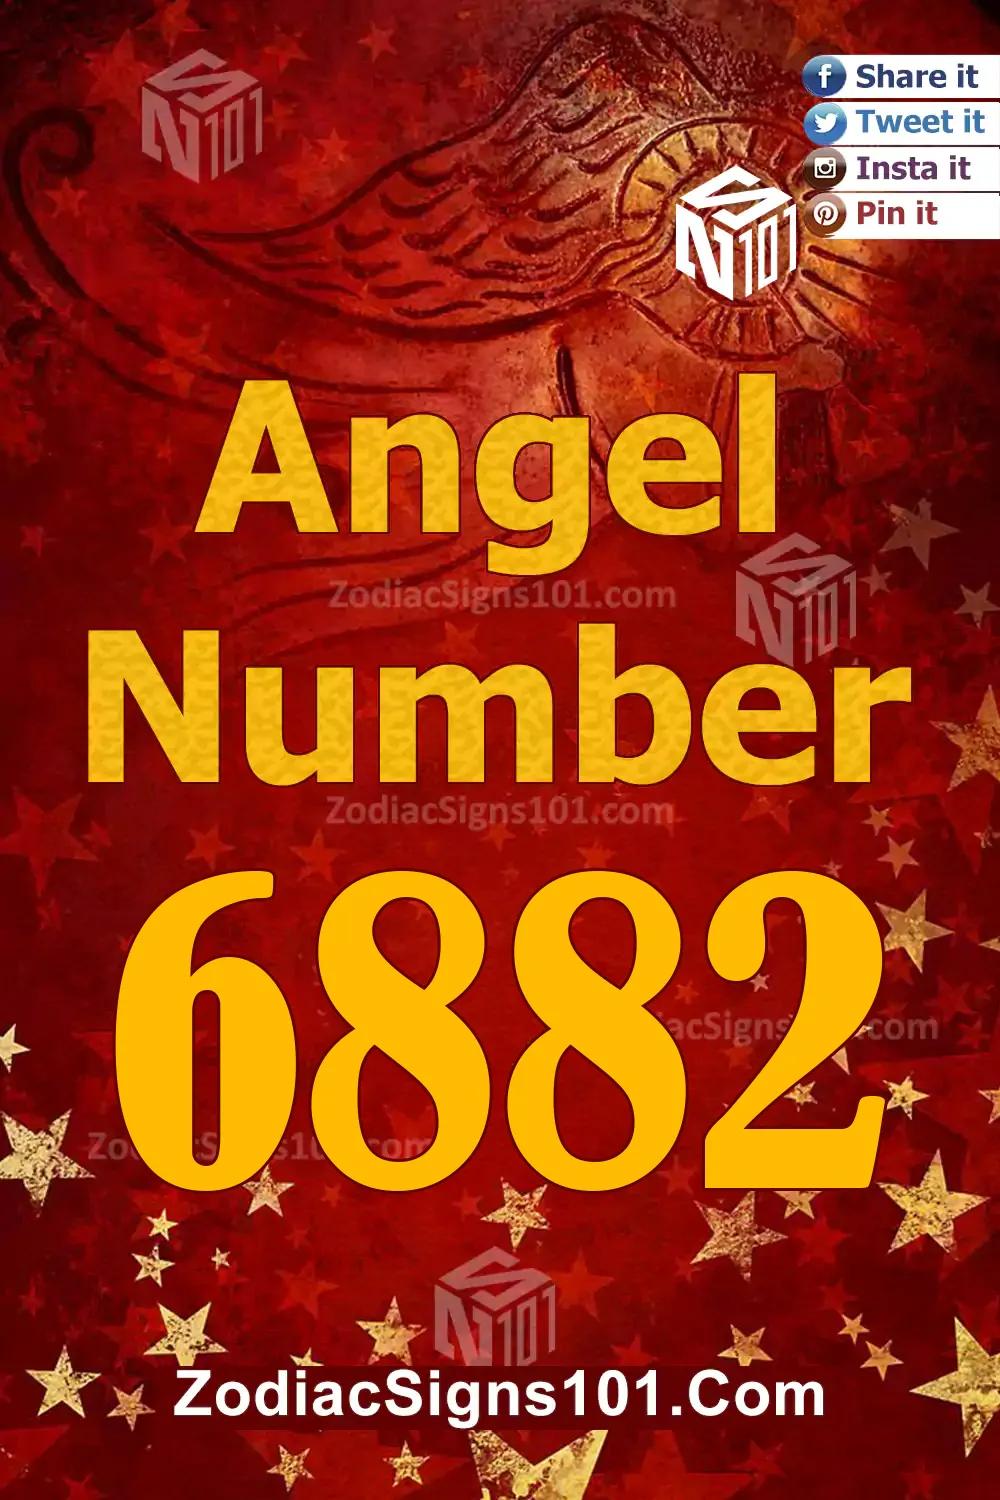 6882 Angel Number Meaning